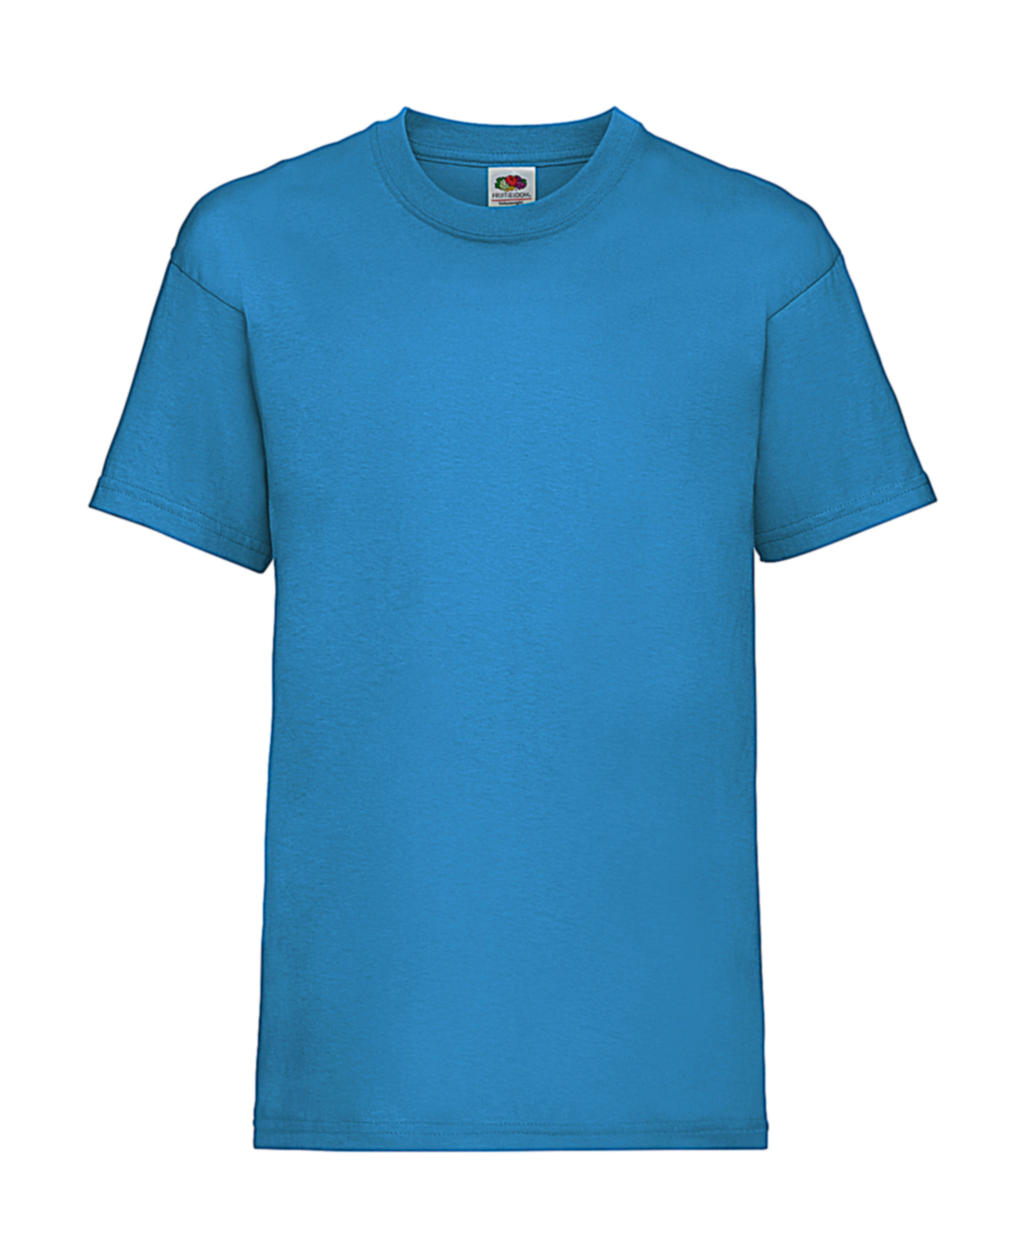  Kids Valueweight T in Farbe Azure Blue